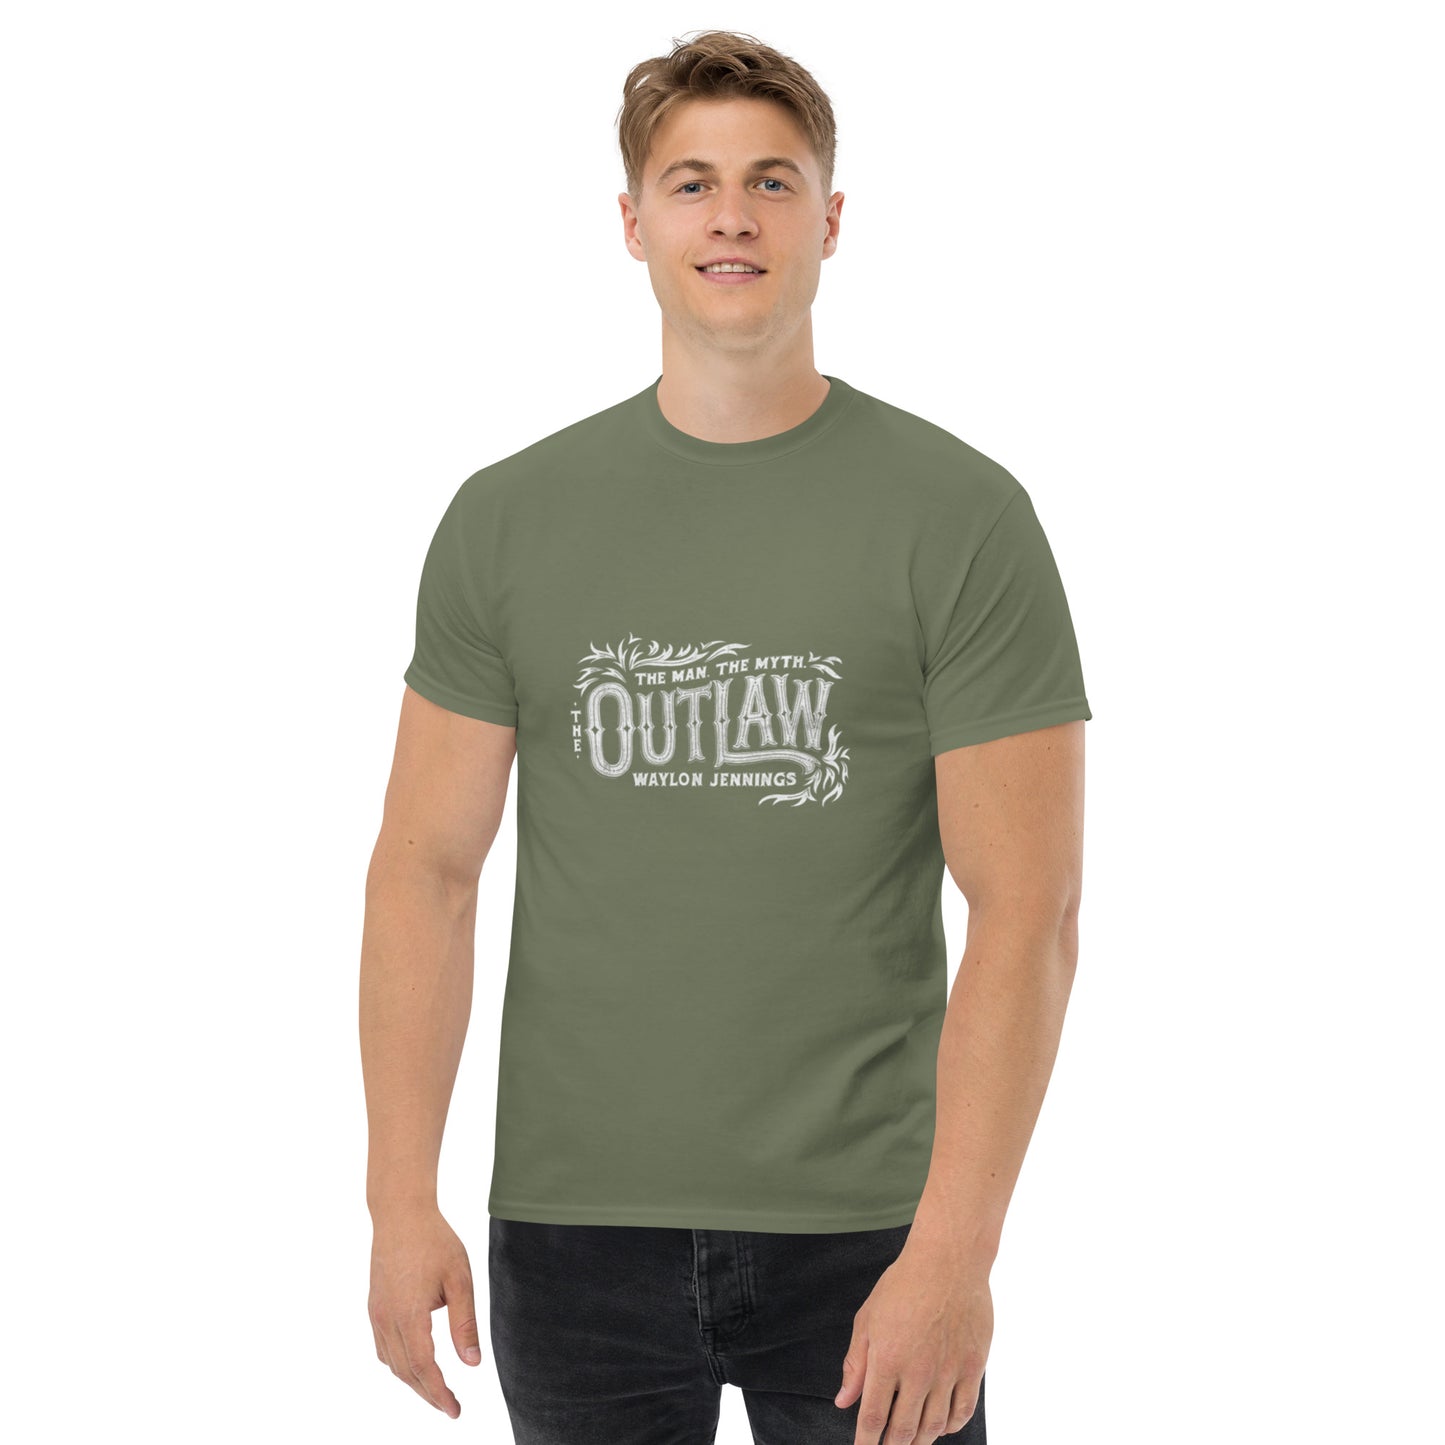 The Outlaw - Inspired by Waylon Jennings | Classic Country Tees - Classic Country Tees